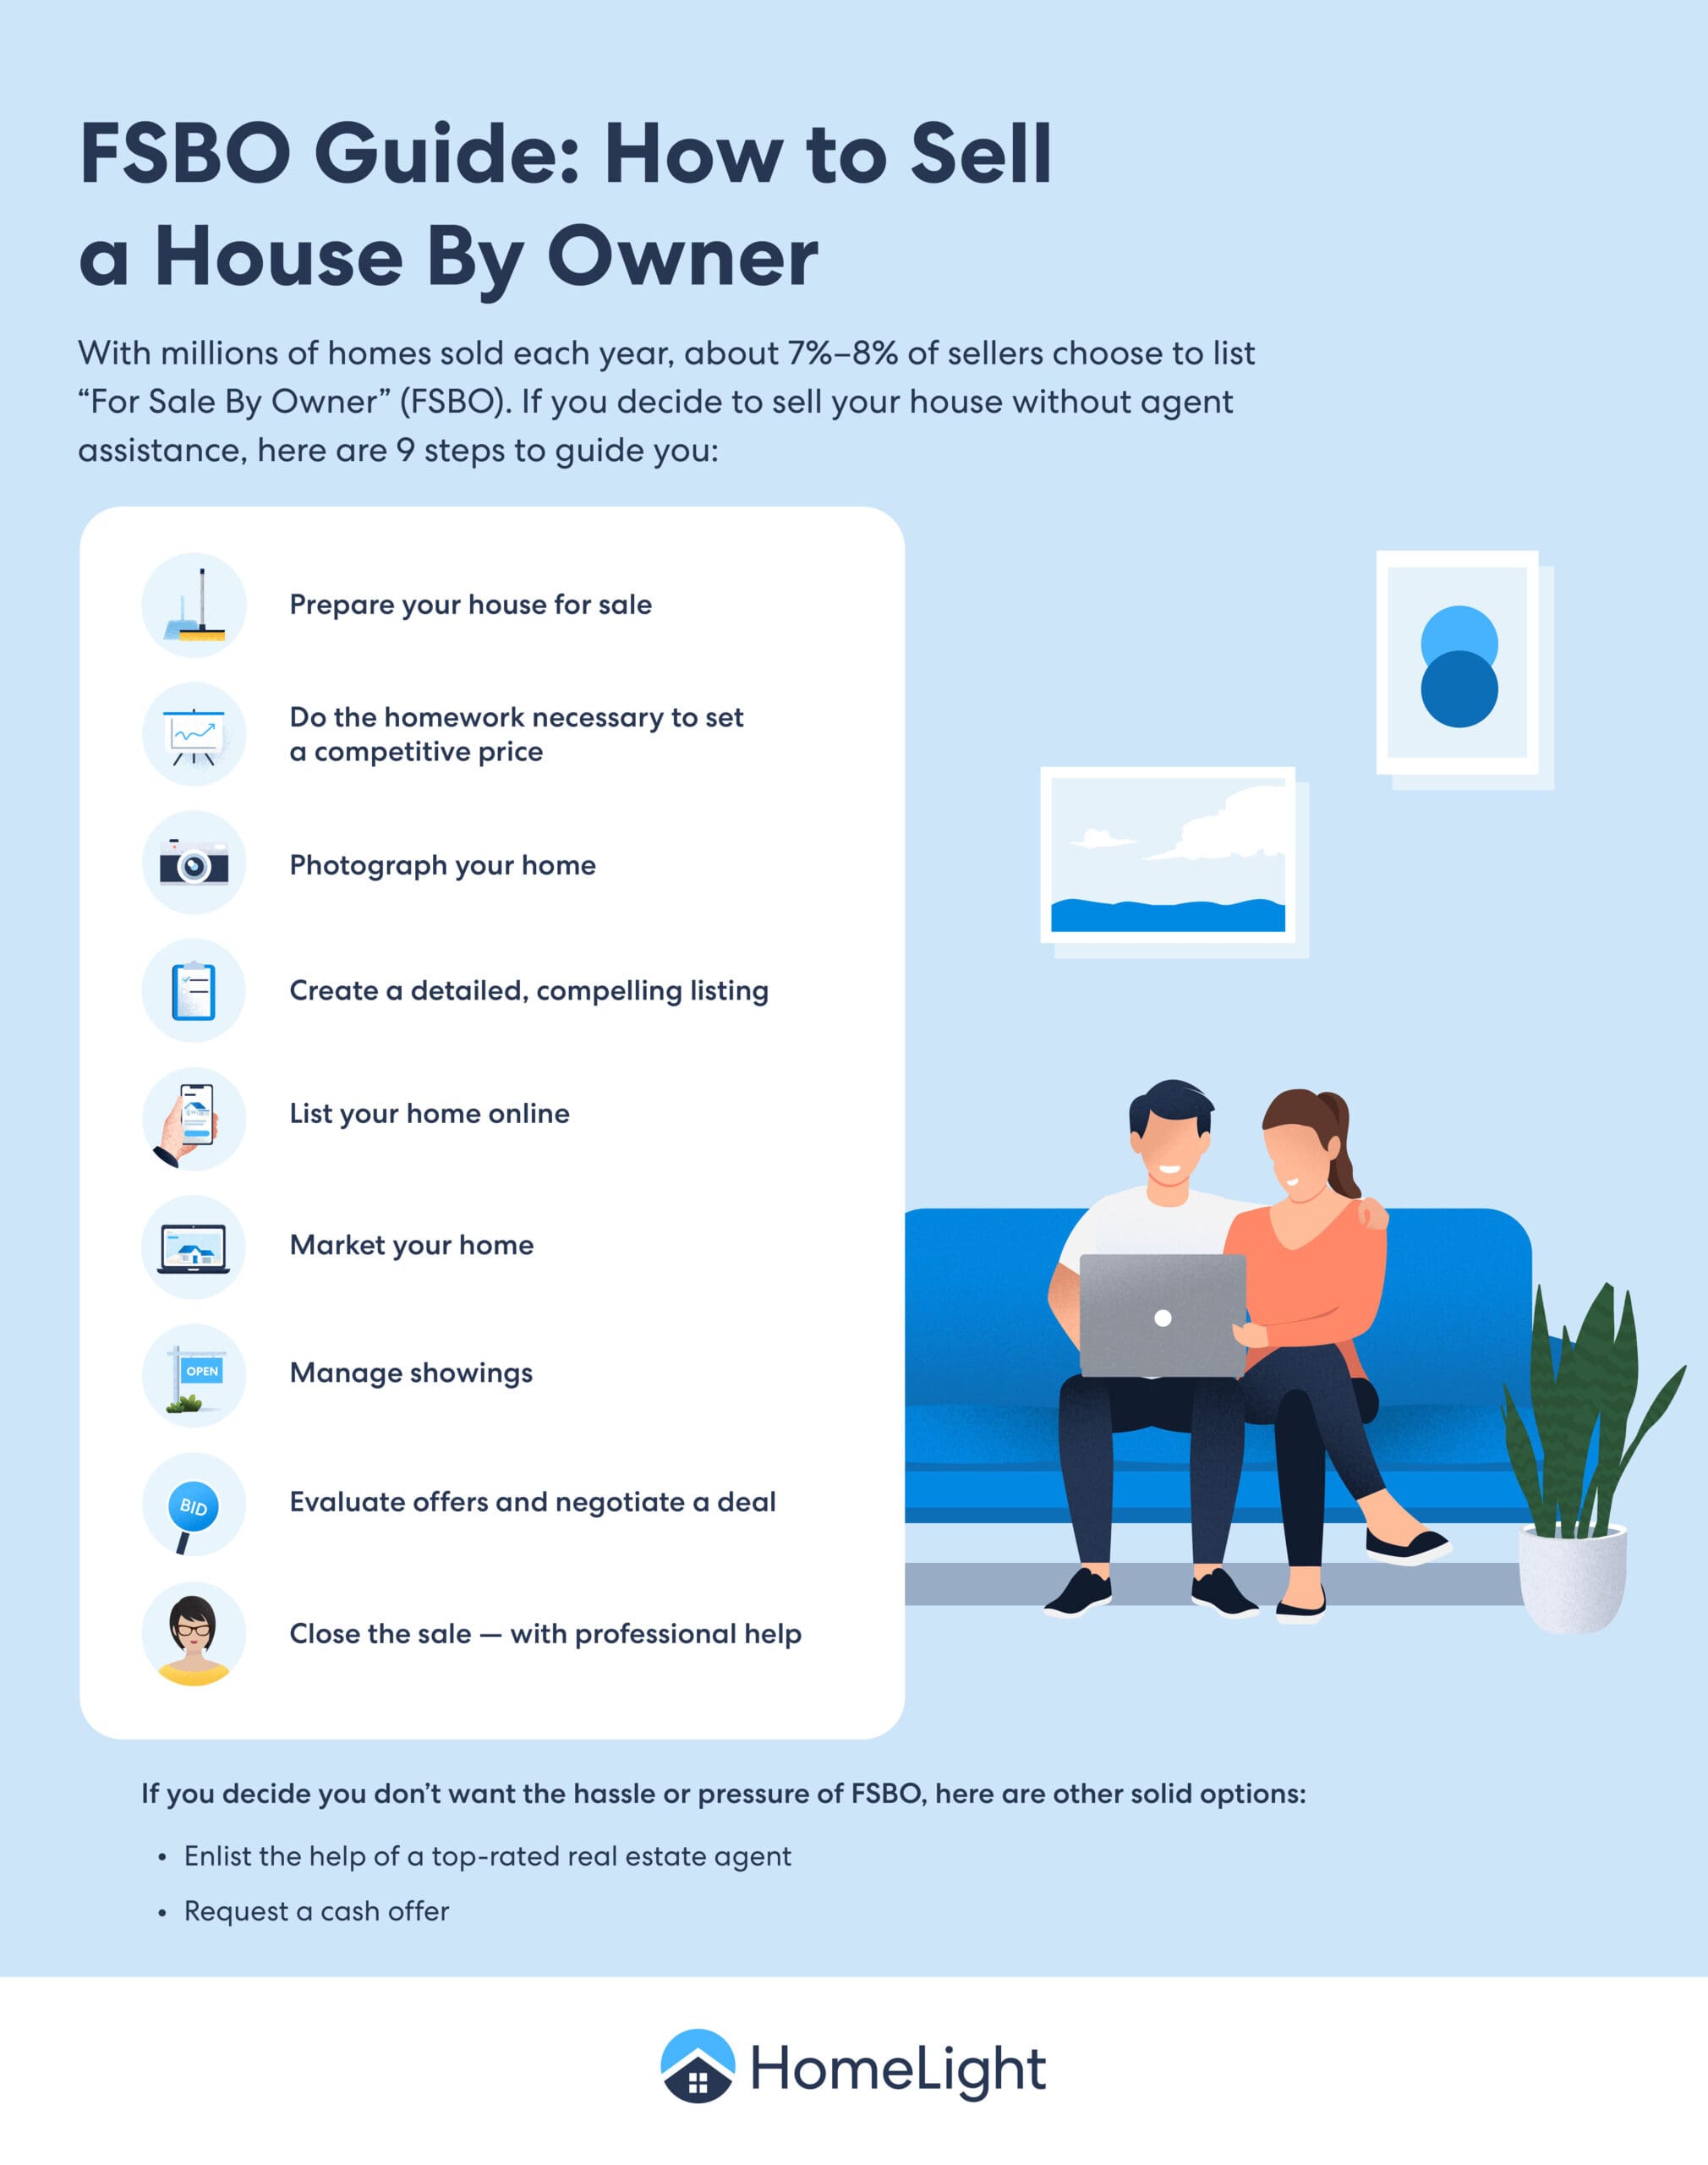 A HomeLight infographic about selling a house by owner.